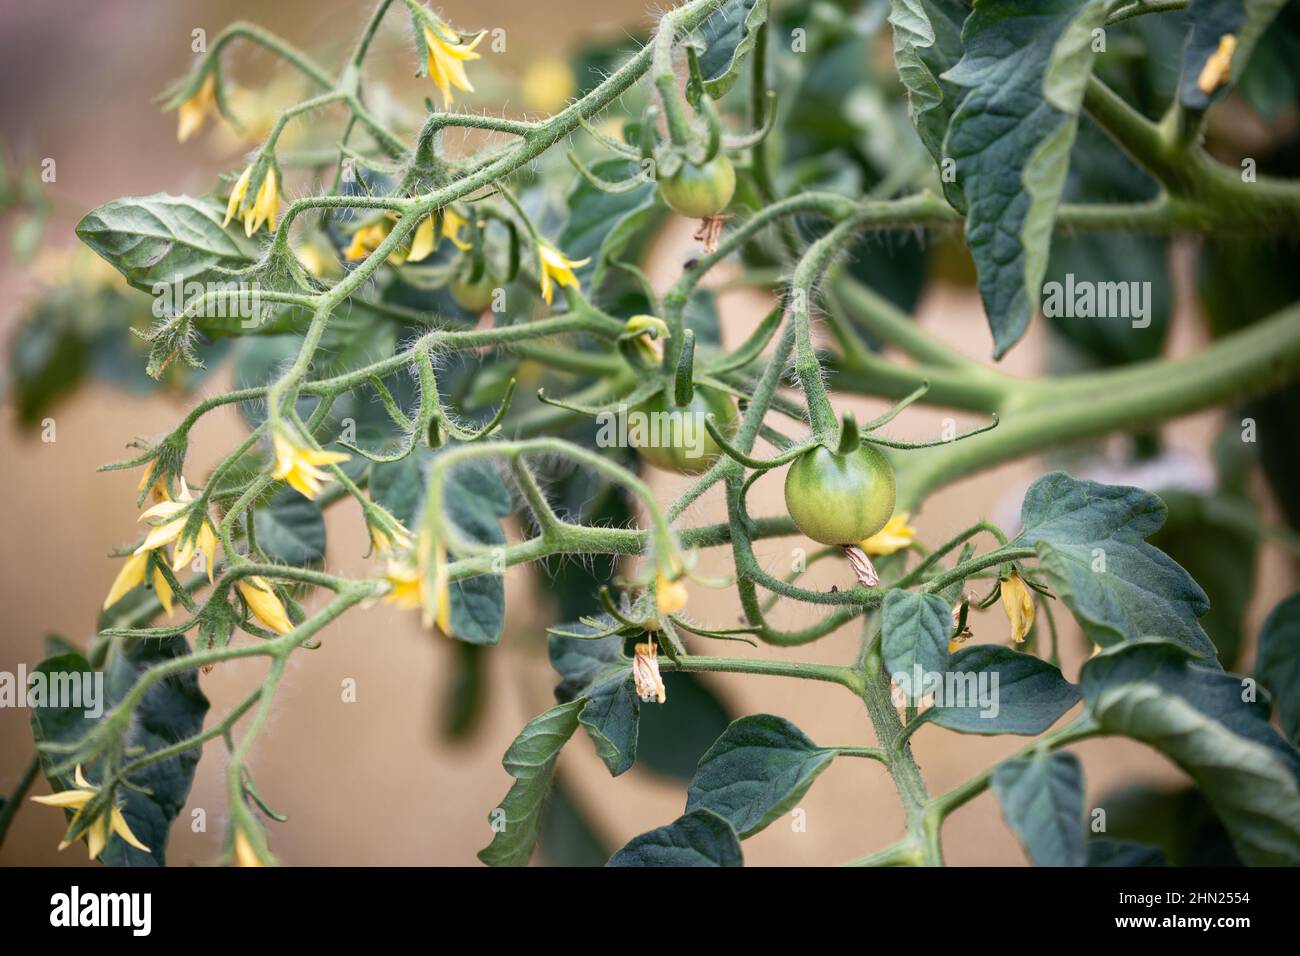 Tomato plant. Large raceme with flowers and small young unripe fruits Stock Photo